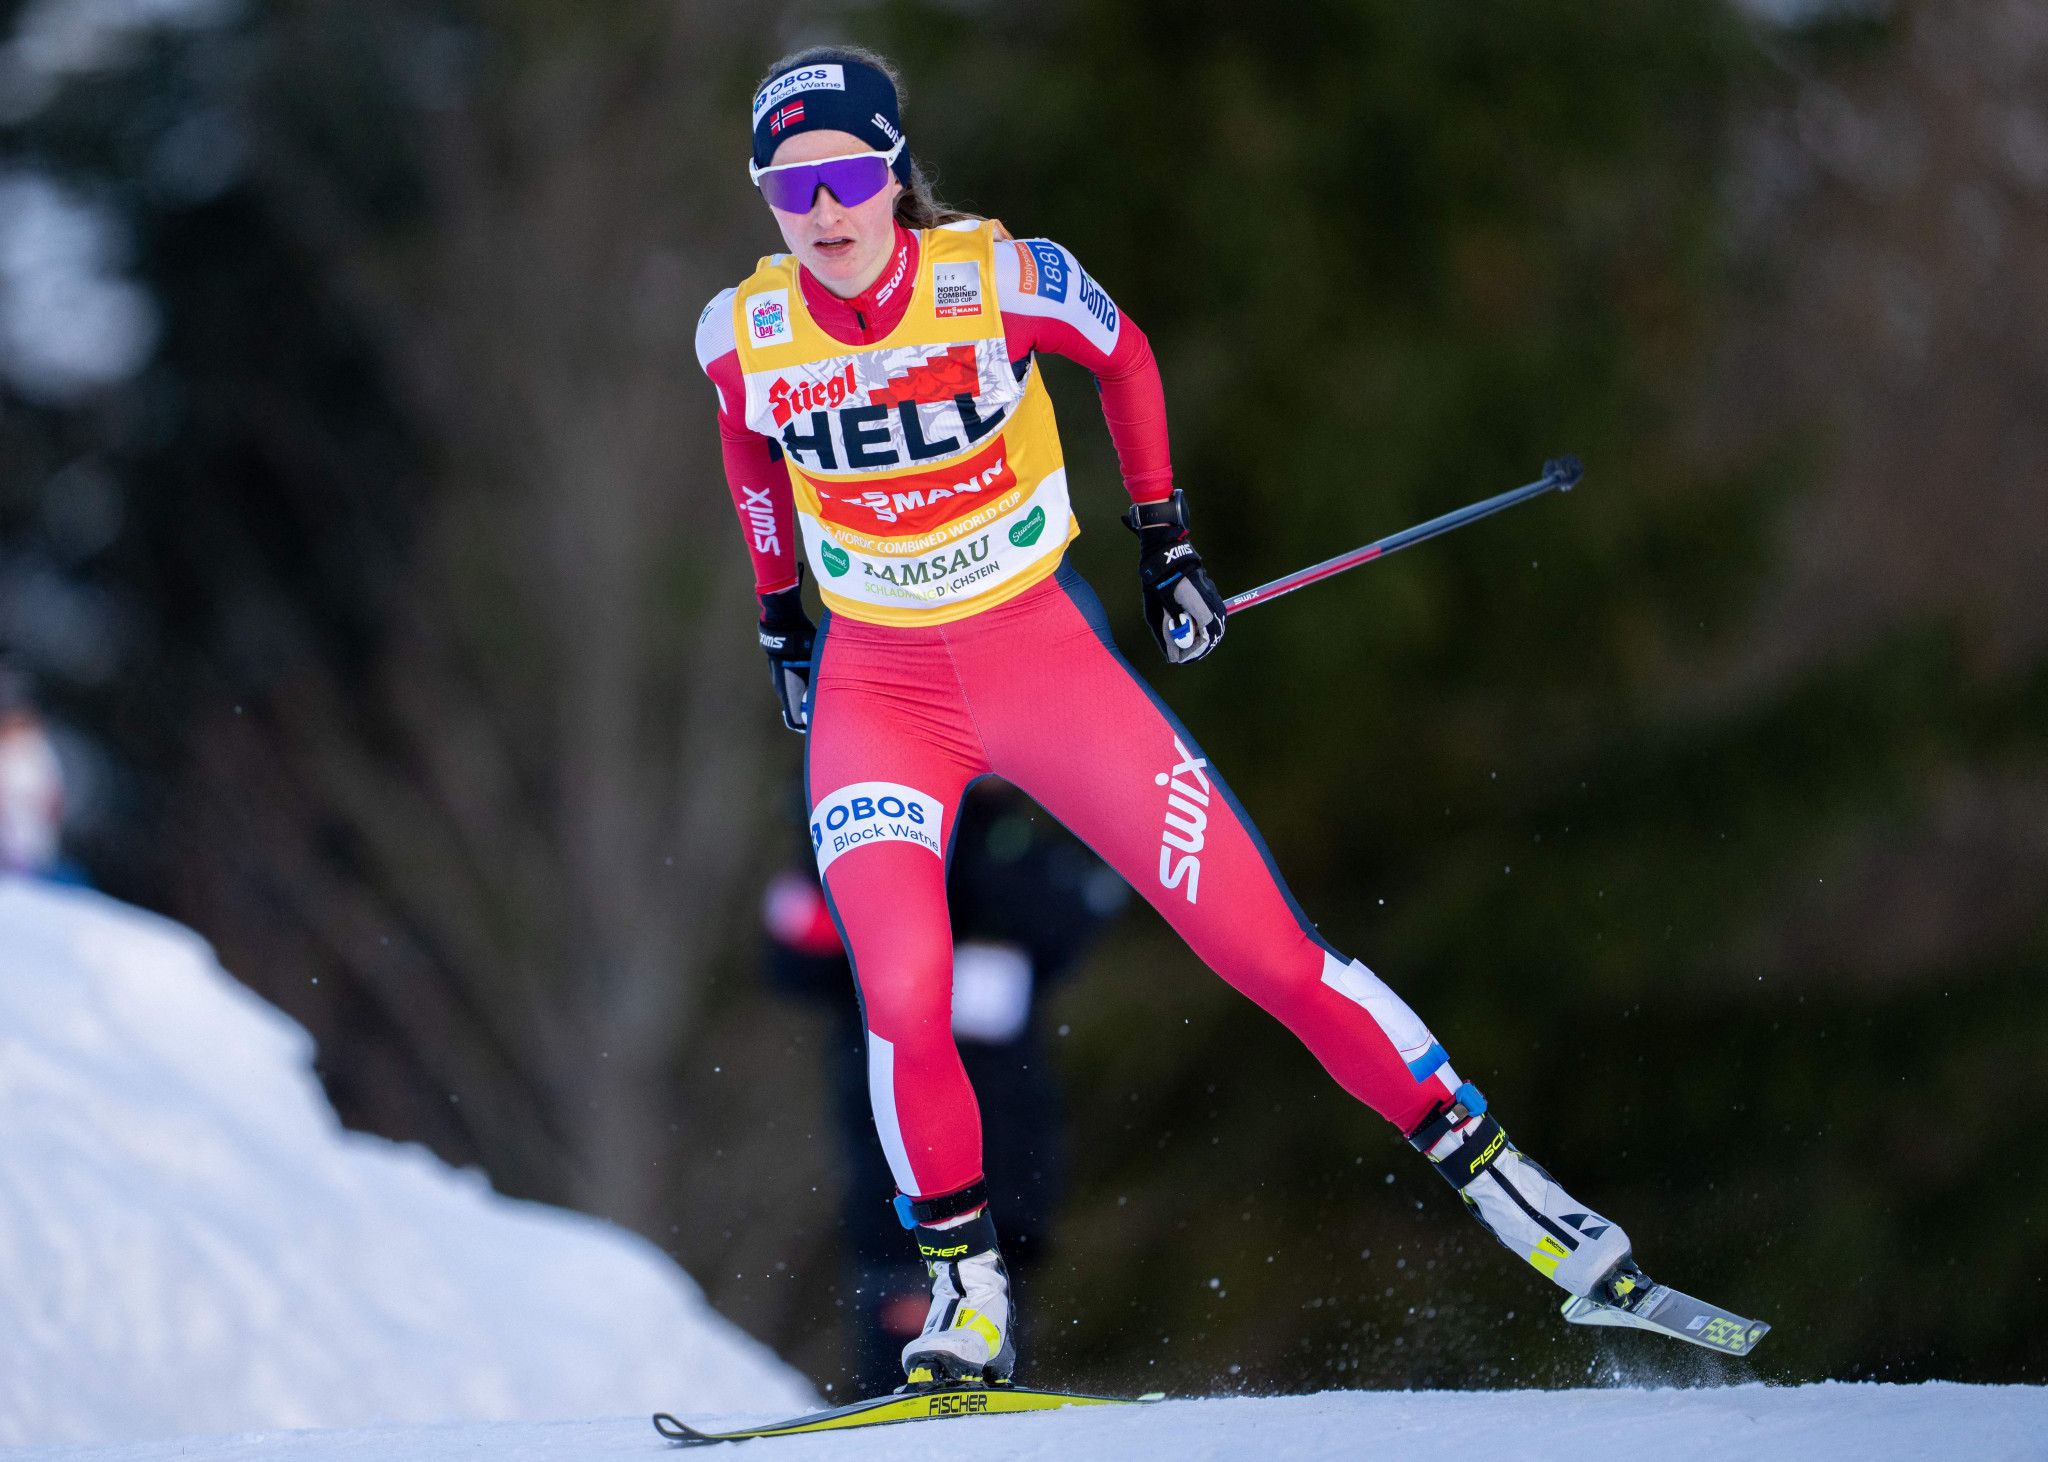 Lamparter and Hansen storm to victory at Nordic Combined World Cup